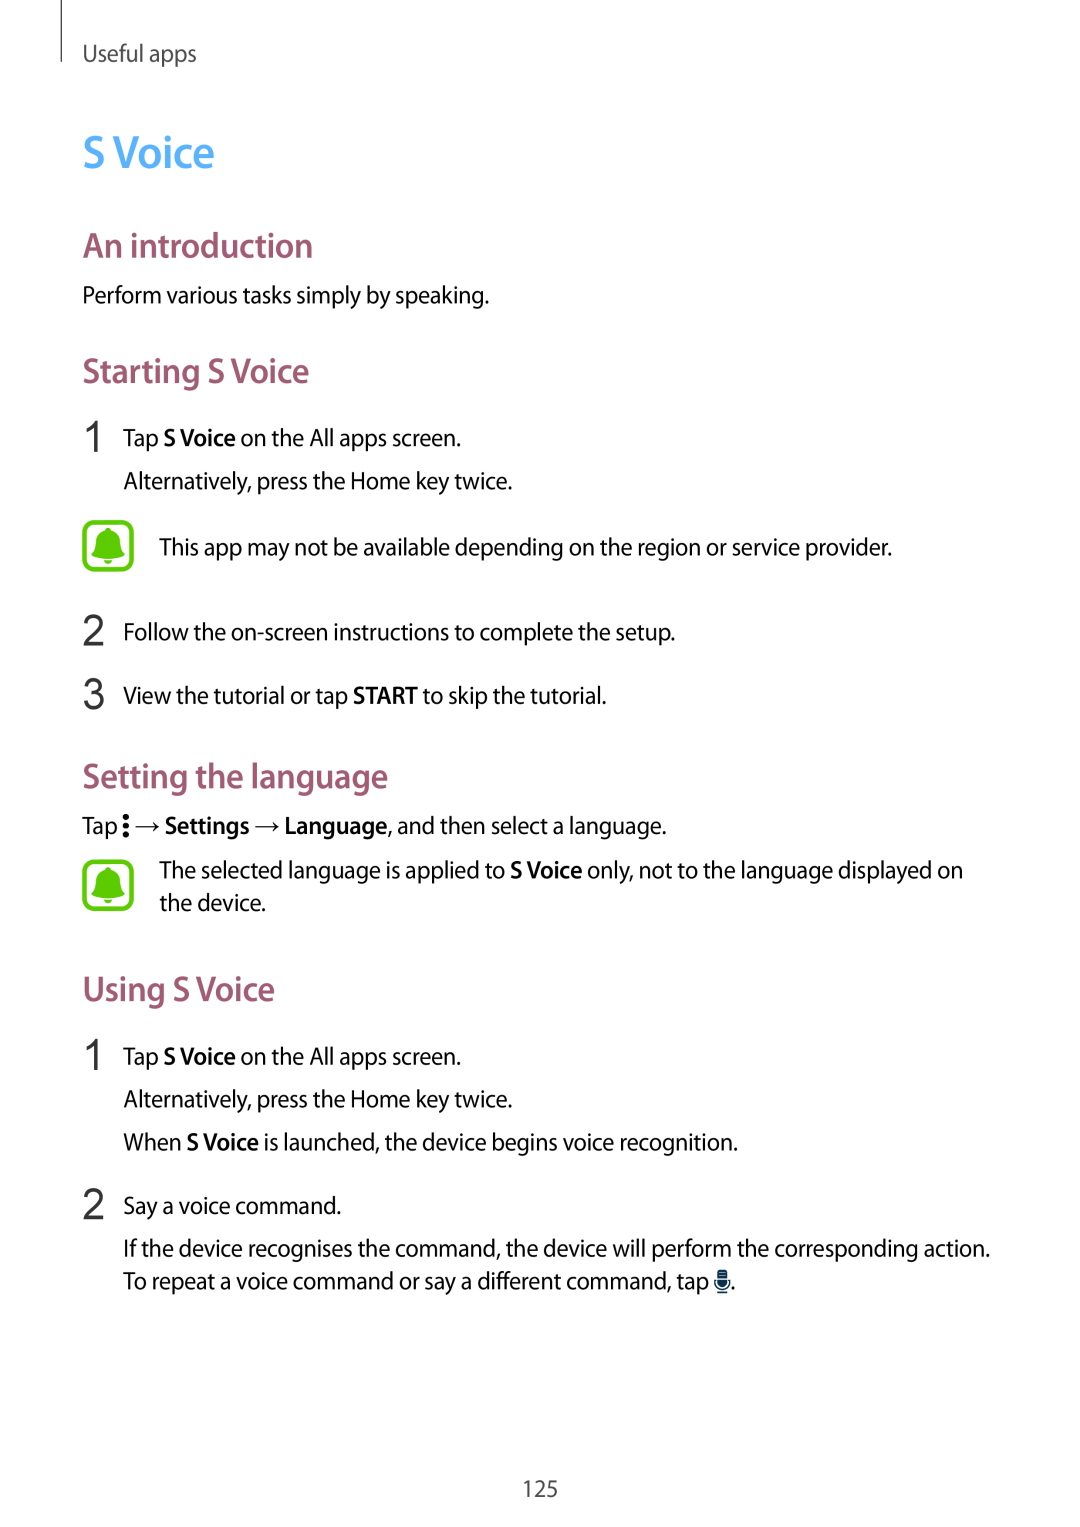 Samsung SM-N915FZKYATO manual Starting S Voice, Setting the language, Using S Voice, An introduction, Useful apps 